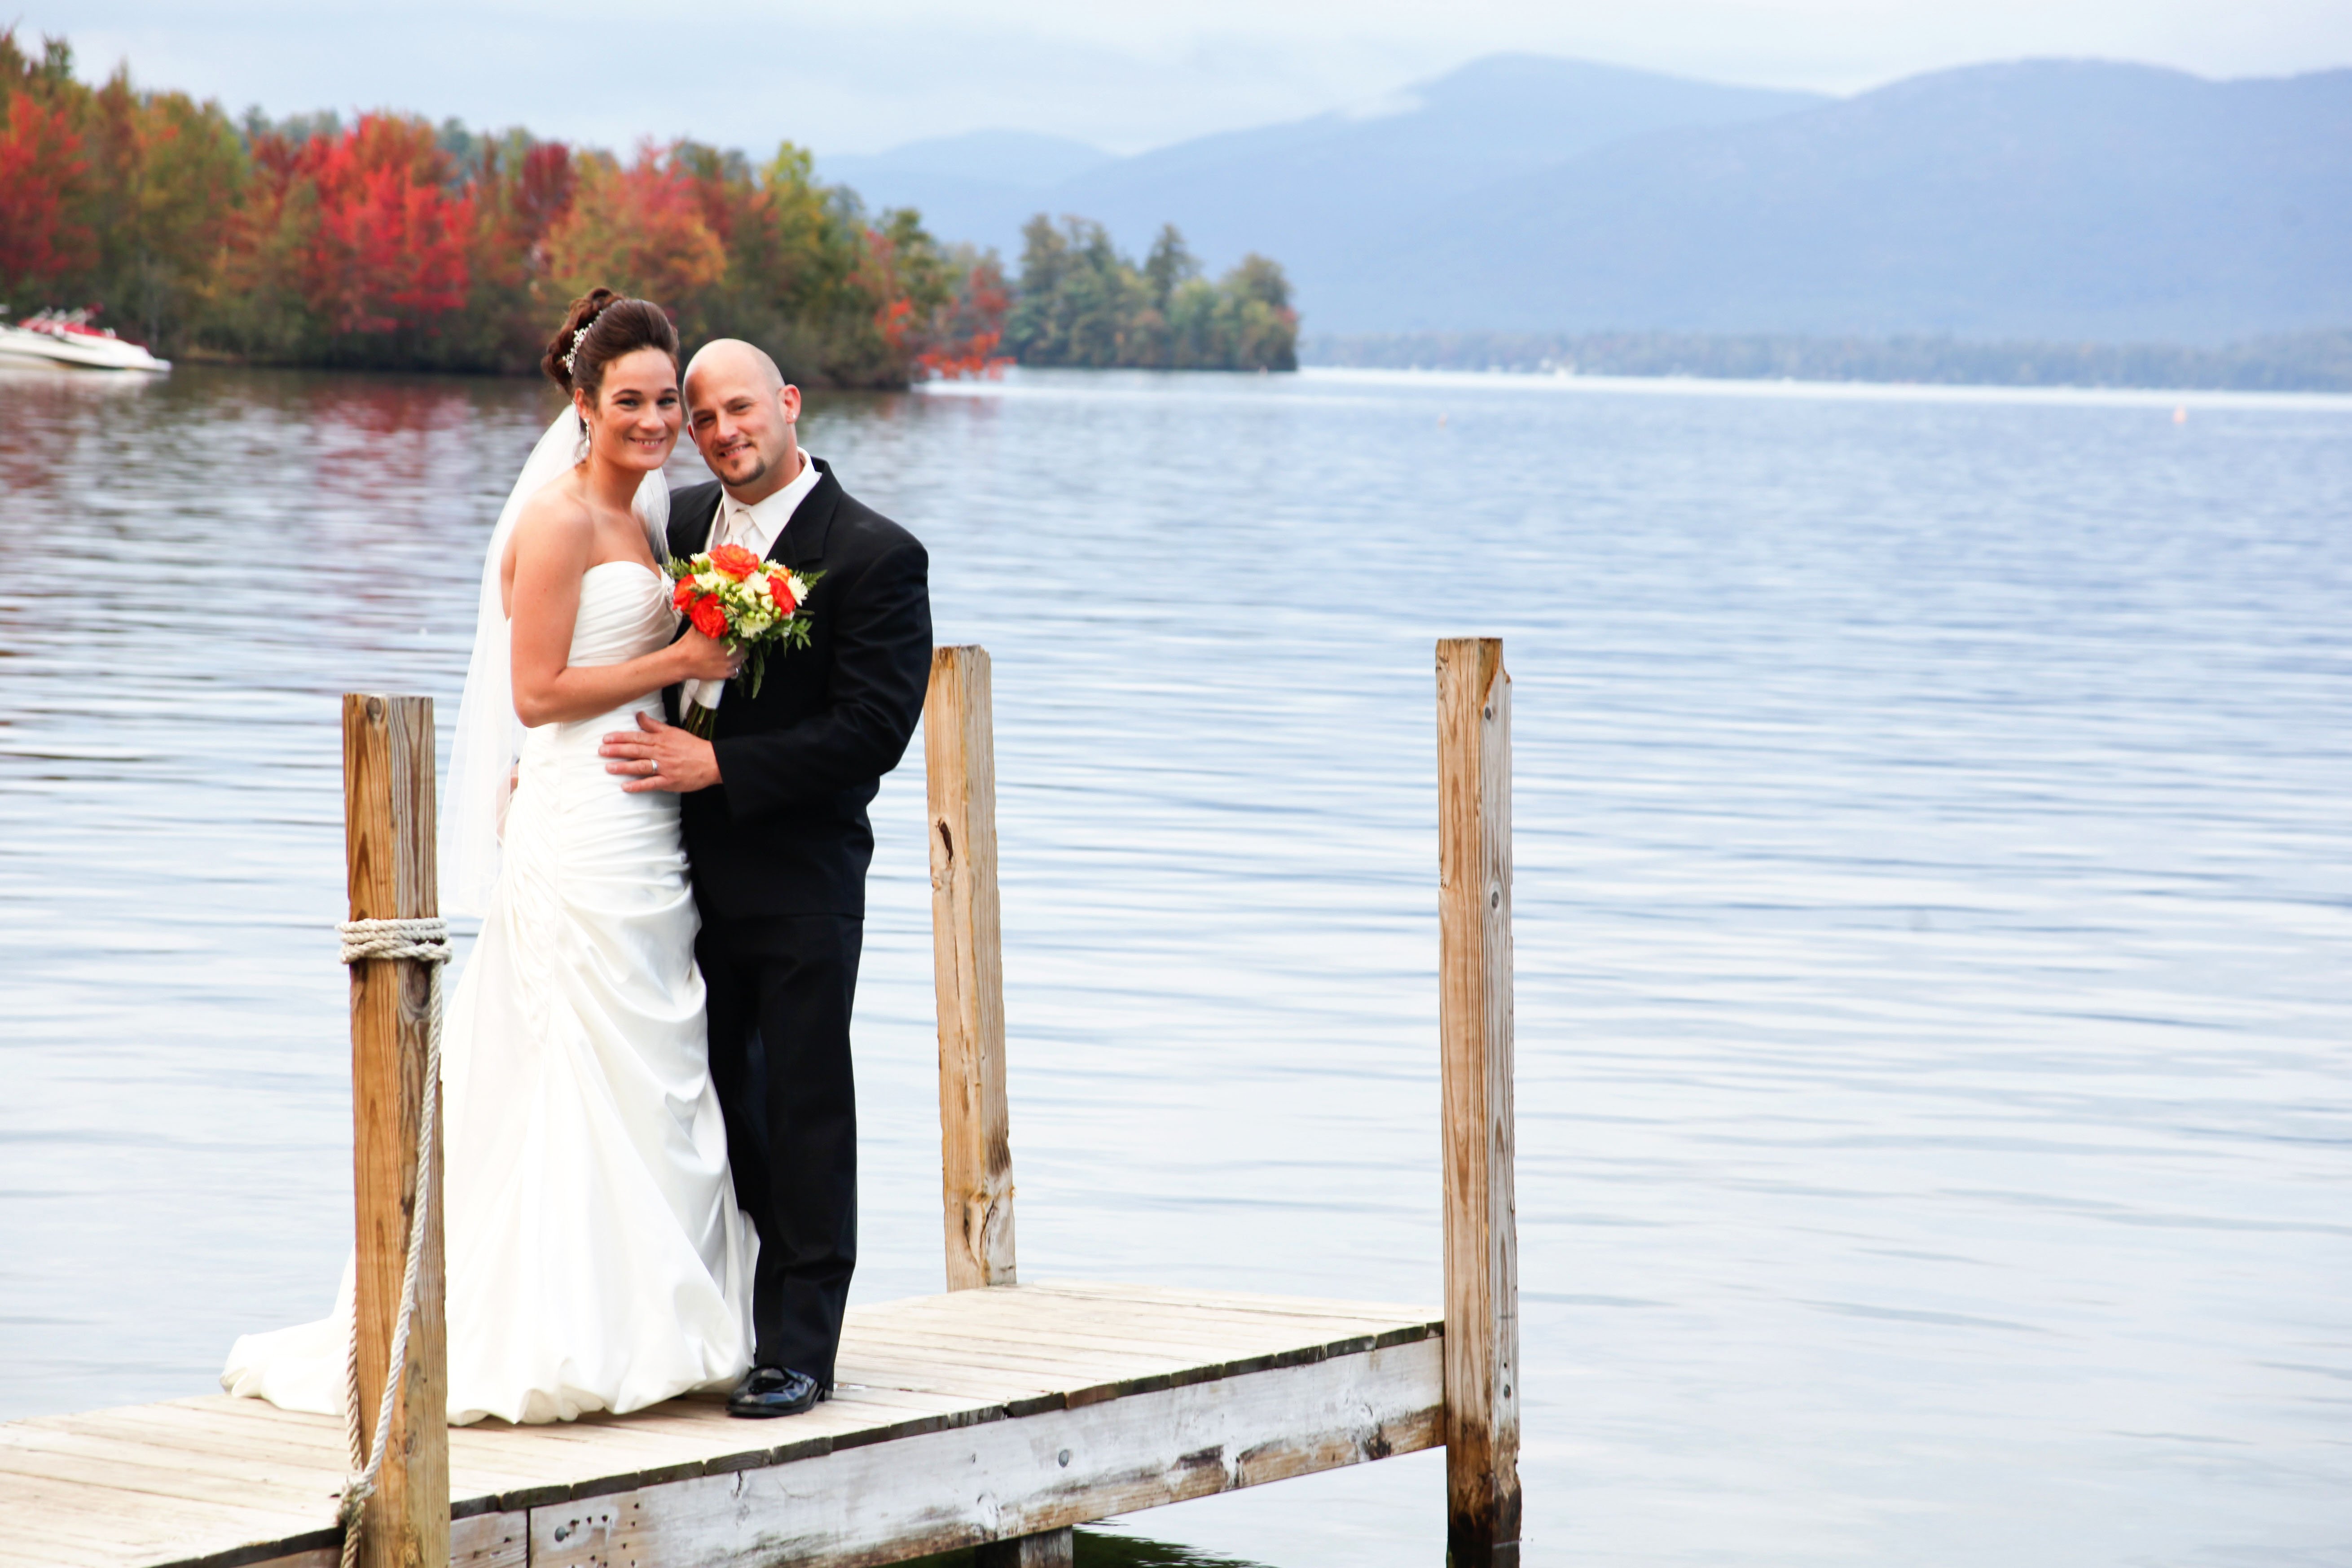 Lake Weddings Tips for Planning The Wedding of Your Dreams at